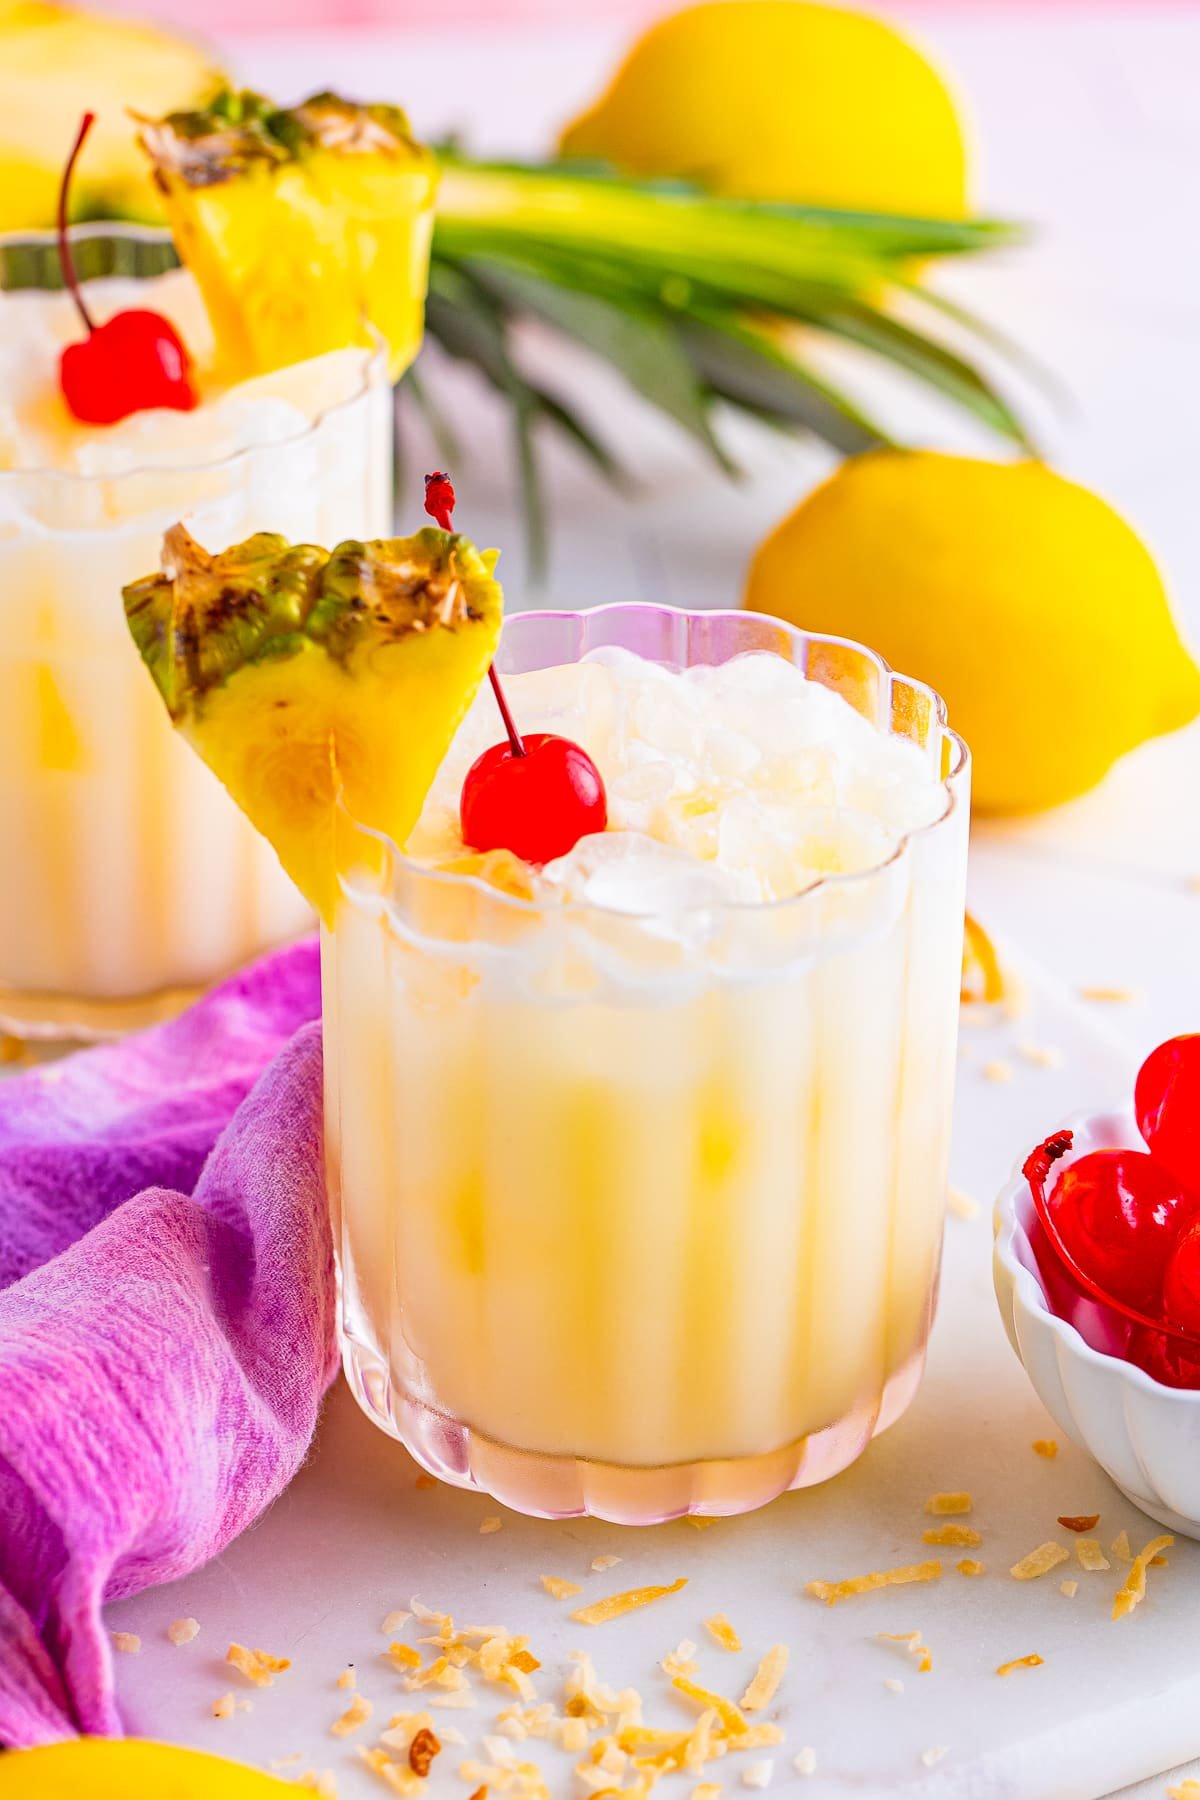 Pineapple Lemonade served in glasses with garnishes